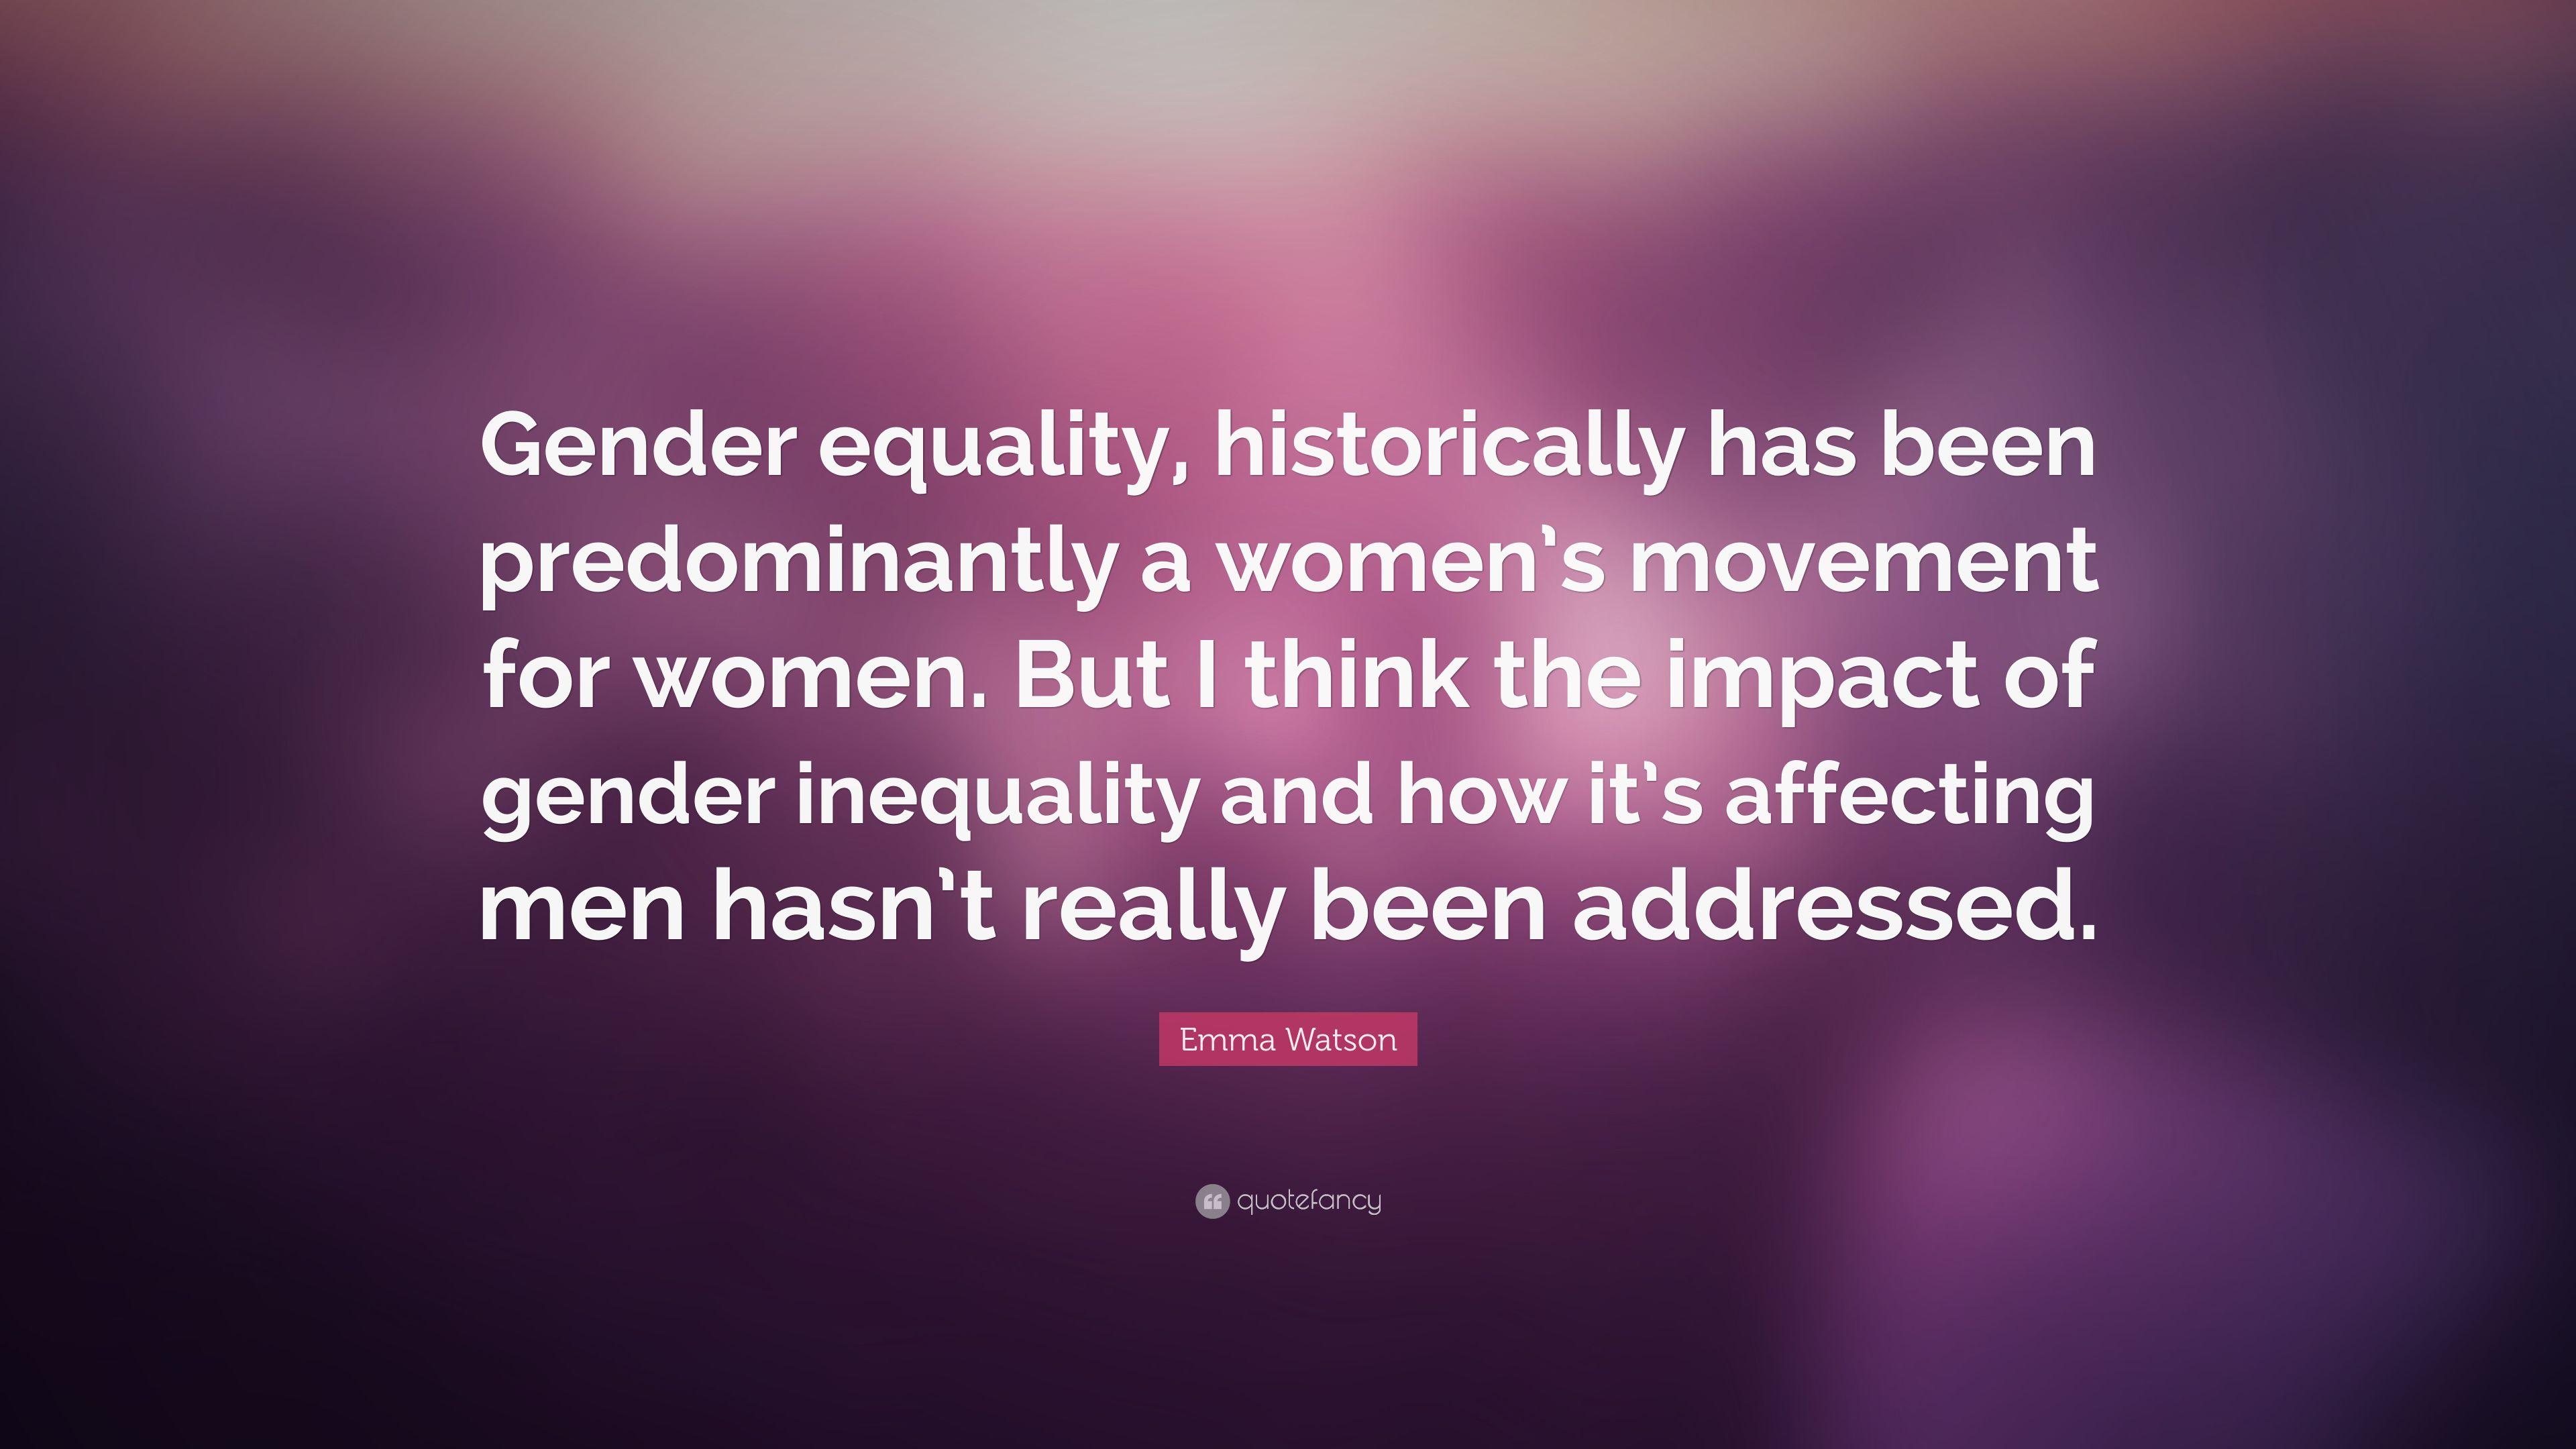 Emma Watson Quote: “Gender equality, historically has been